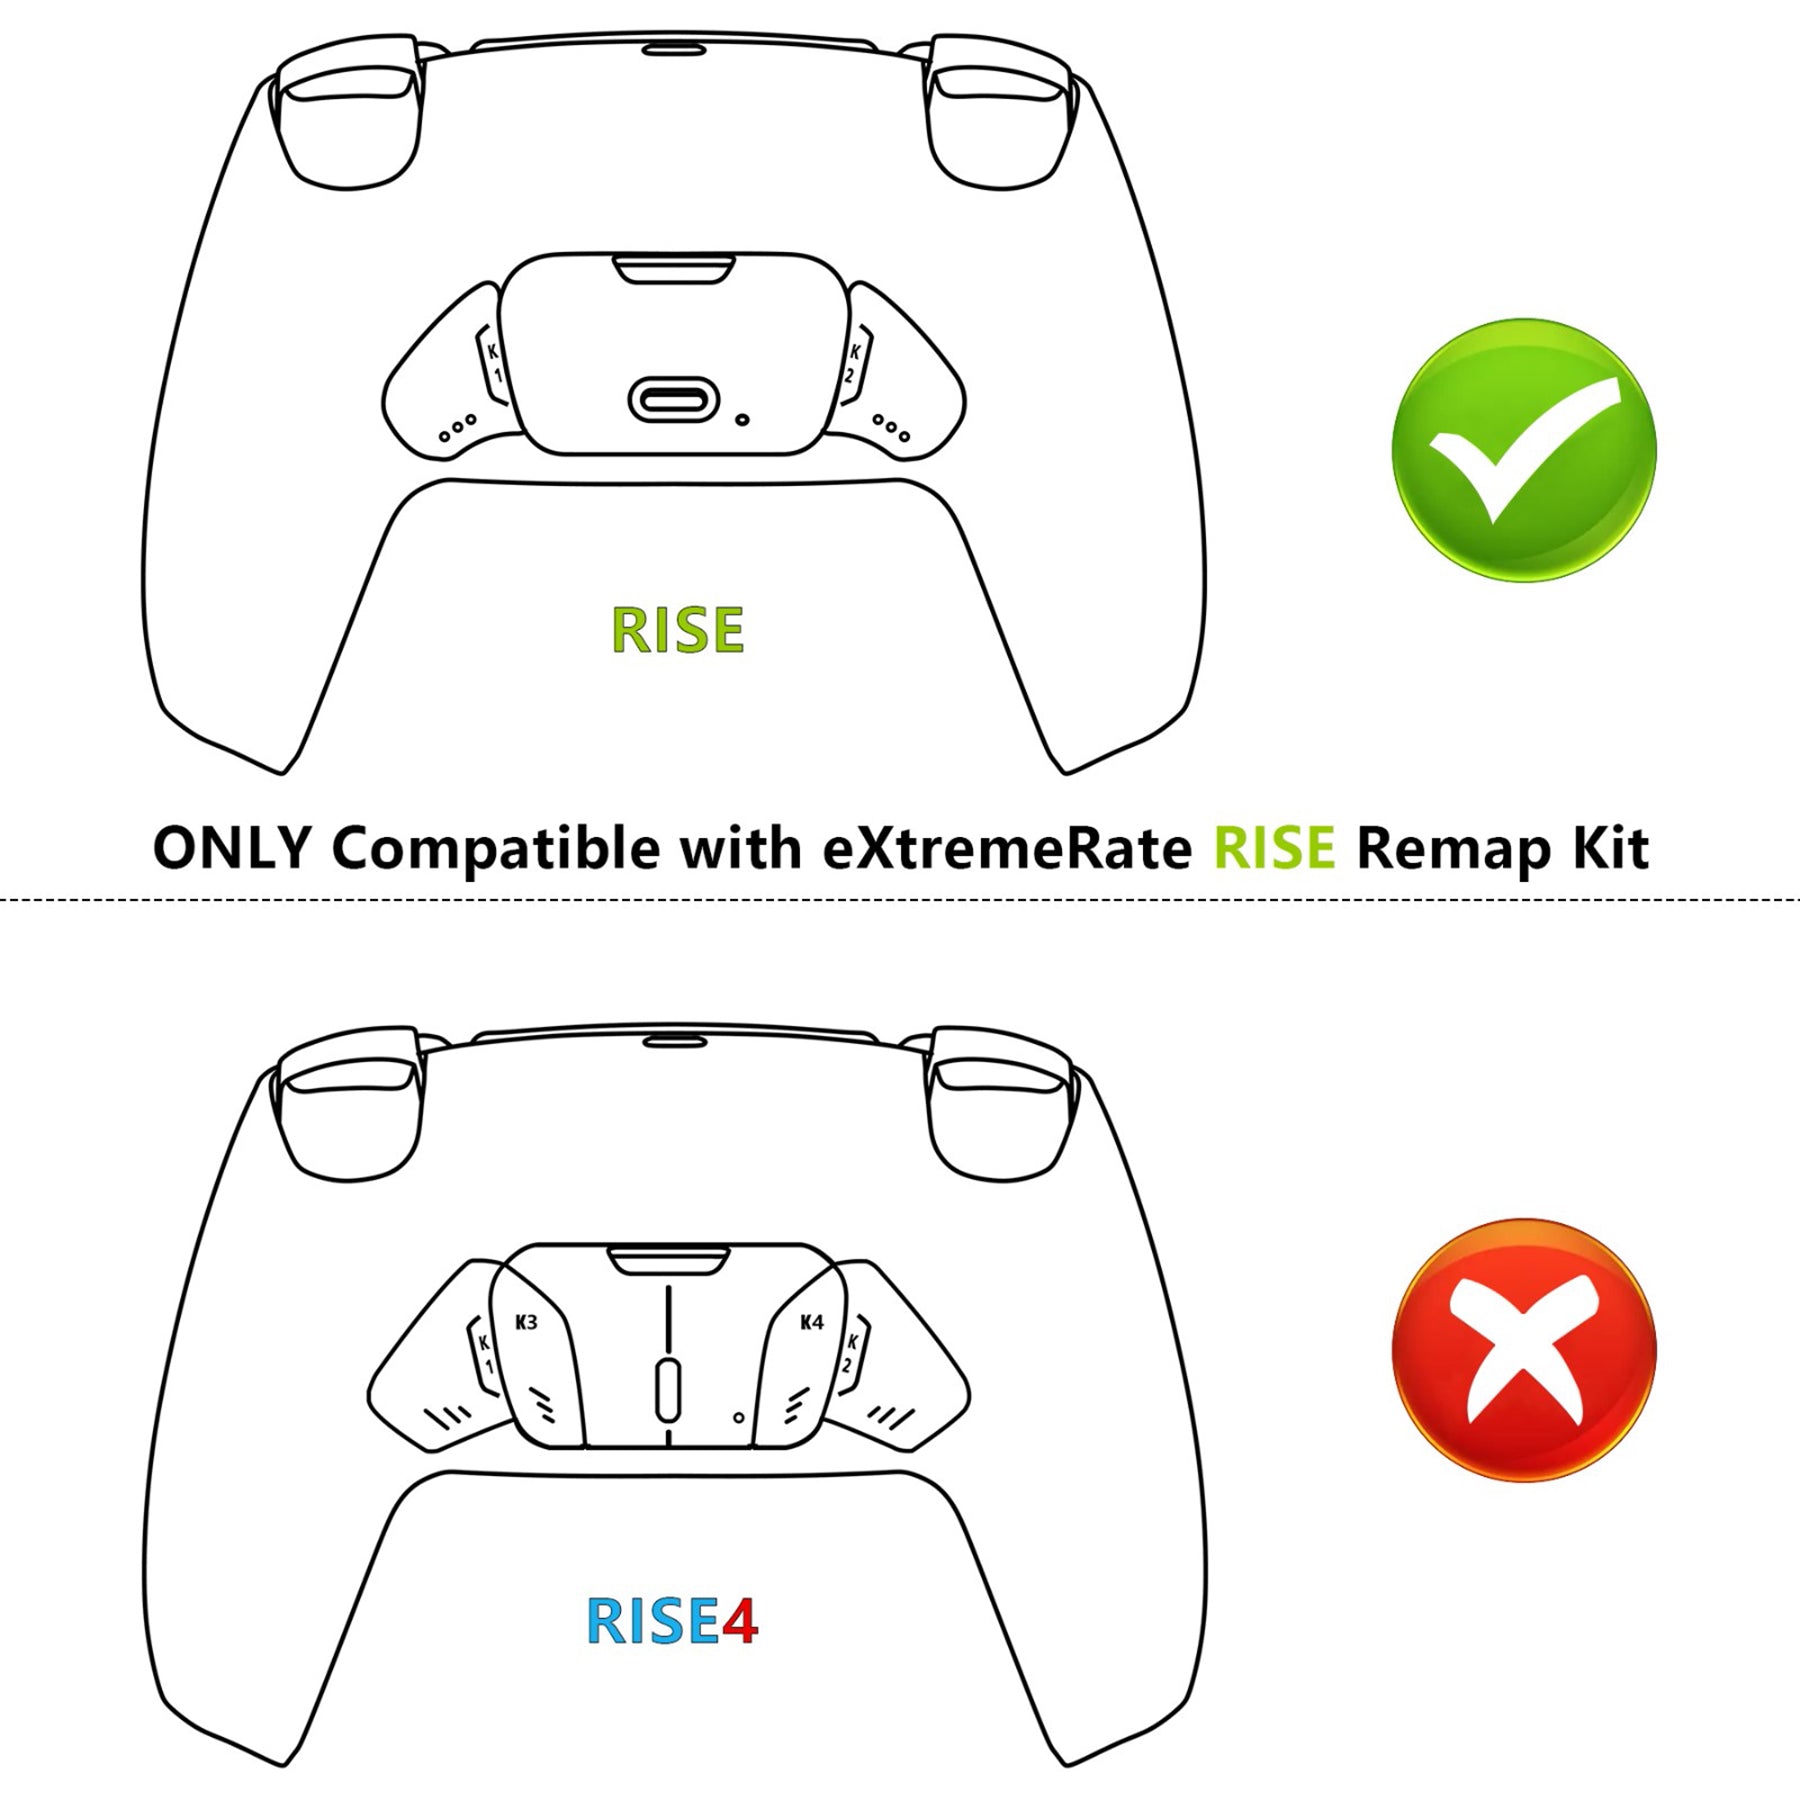 eXtremeRate Replacement Redesigned K1 K2 Back Buttons for eXtremerate RISE Remap Kit, Compatible with PS5 Controller - Cosmic Red eXtremeRate